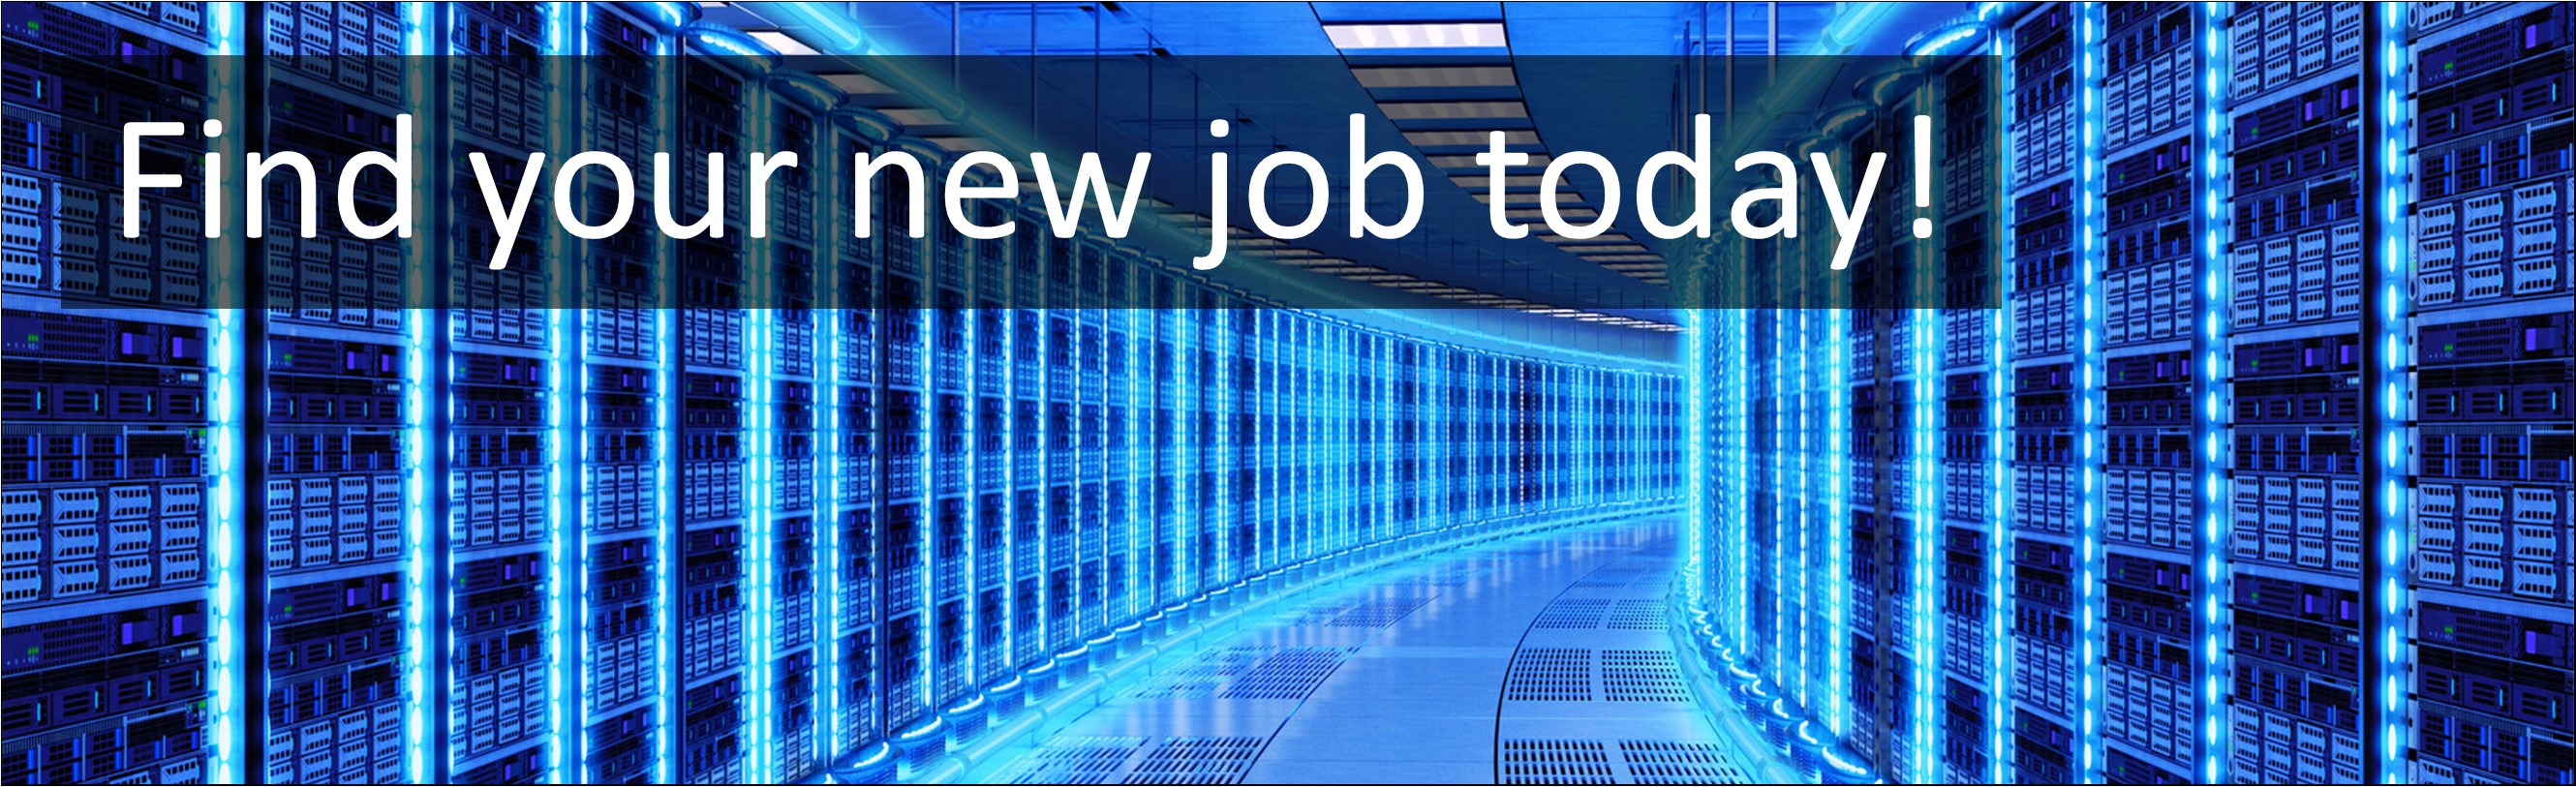 IT & Communication Jobs. Junior Network Support Engineer Jobs, Careers & Vacancies in Hemel Hempstead, Hertfordshire. Advertised by AWD online – Multi-Job Board Advertising and CV Sourcing Recruitment Services